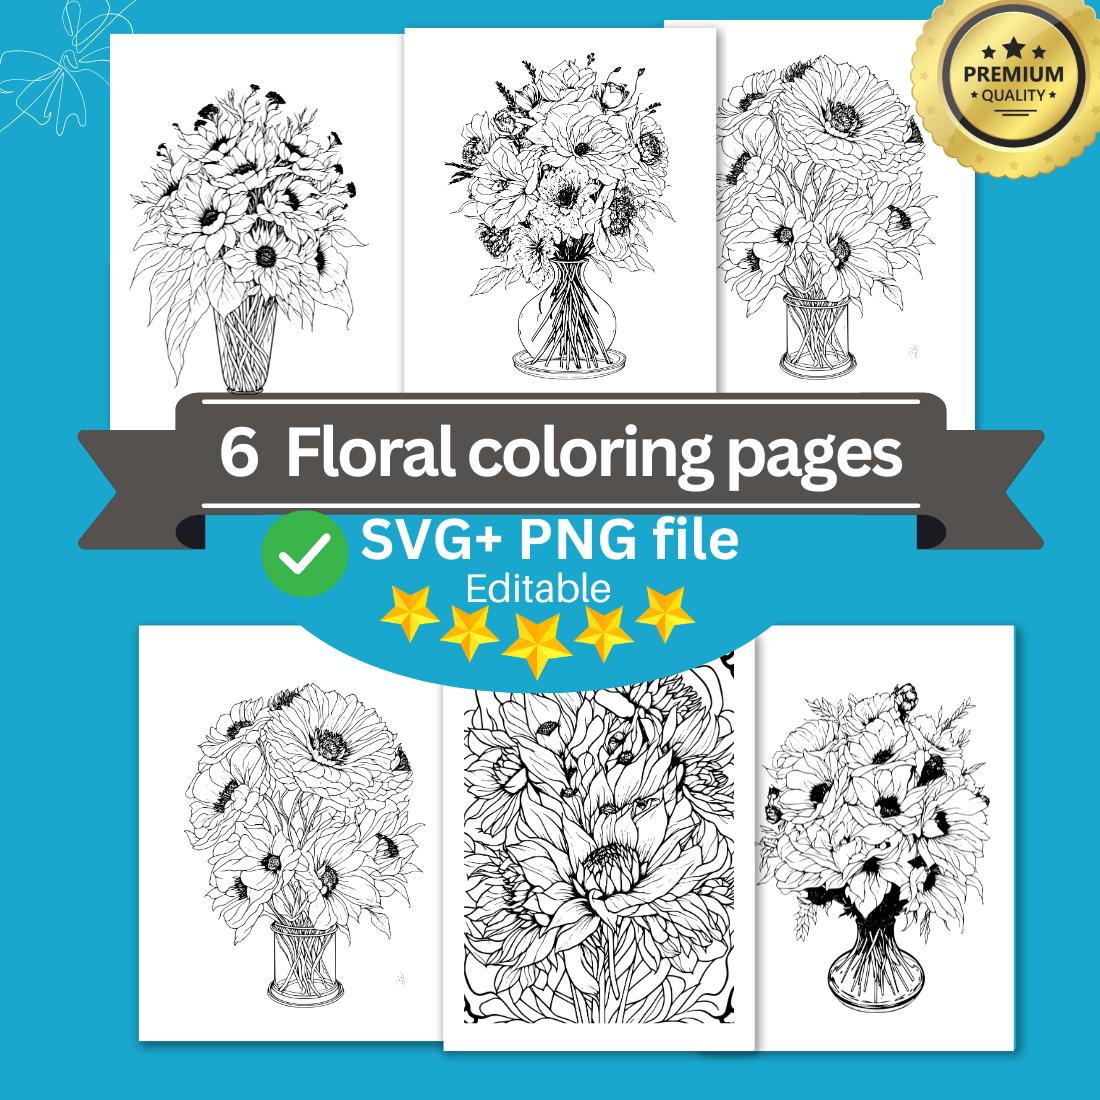 6 Flower Drawing Floral Coloring Pages For Adults (SVG and PNG) cover image.